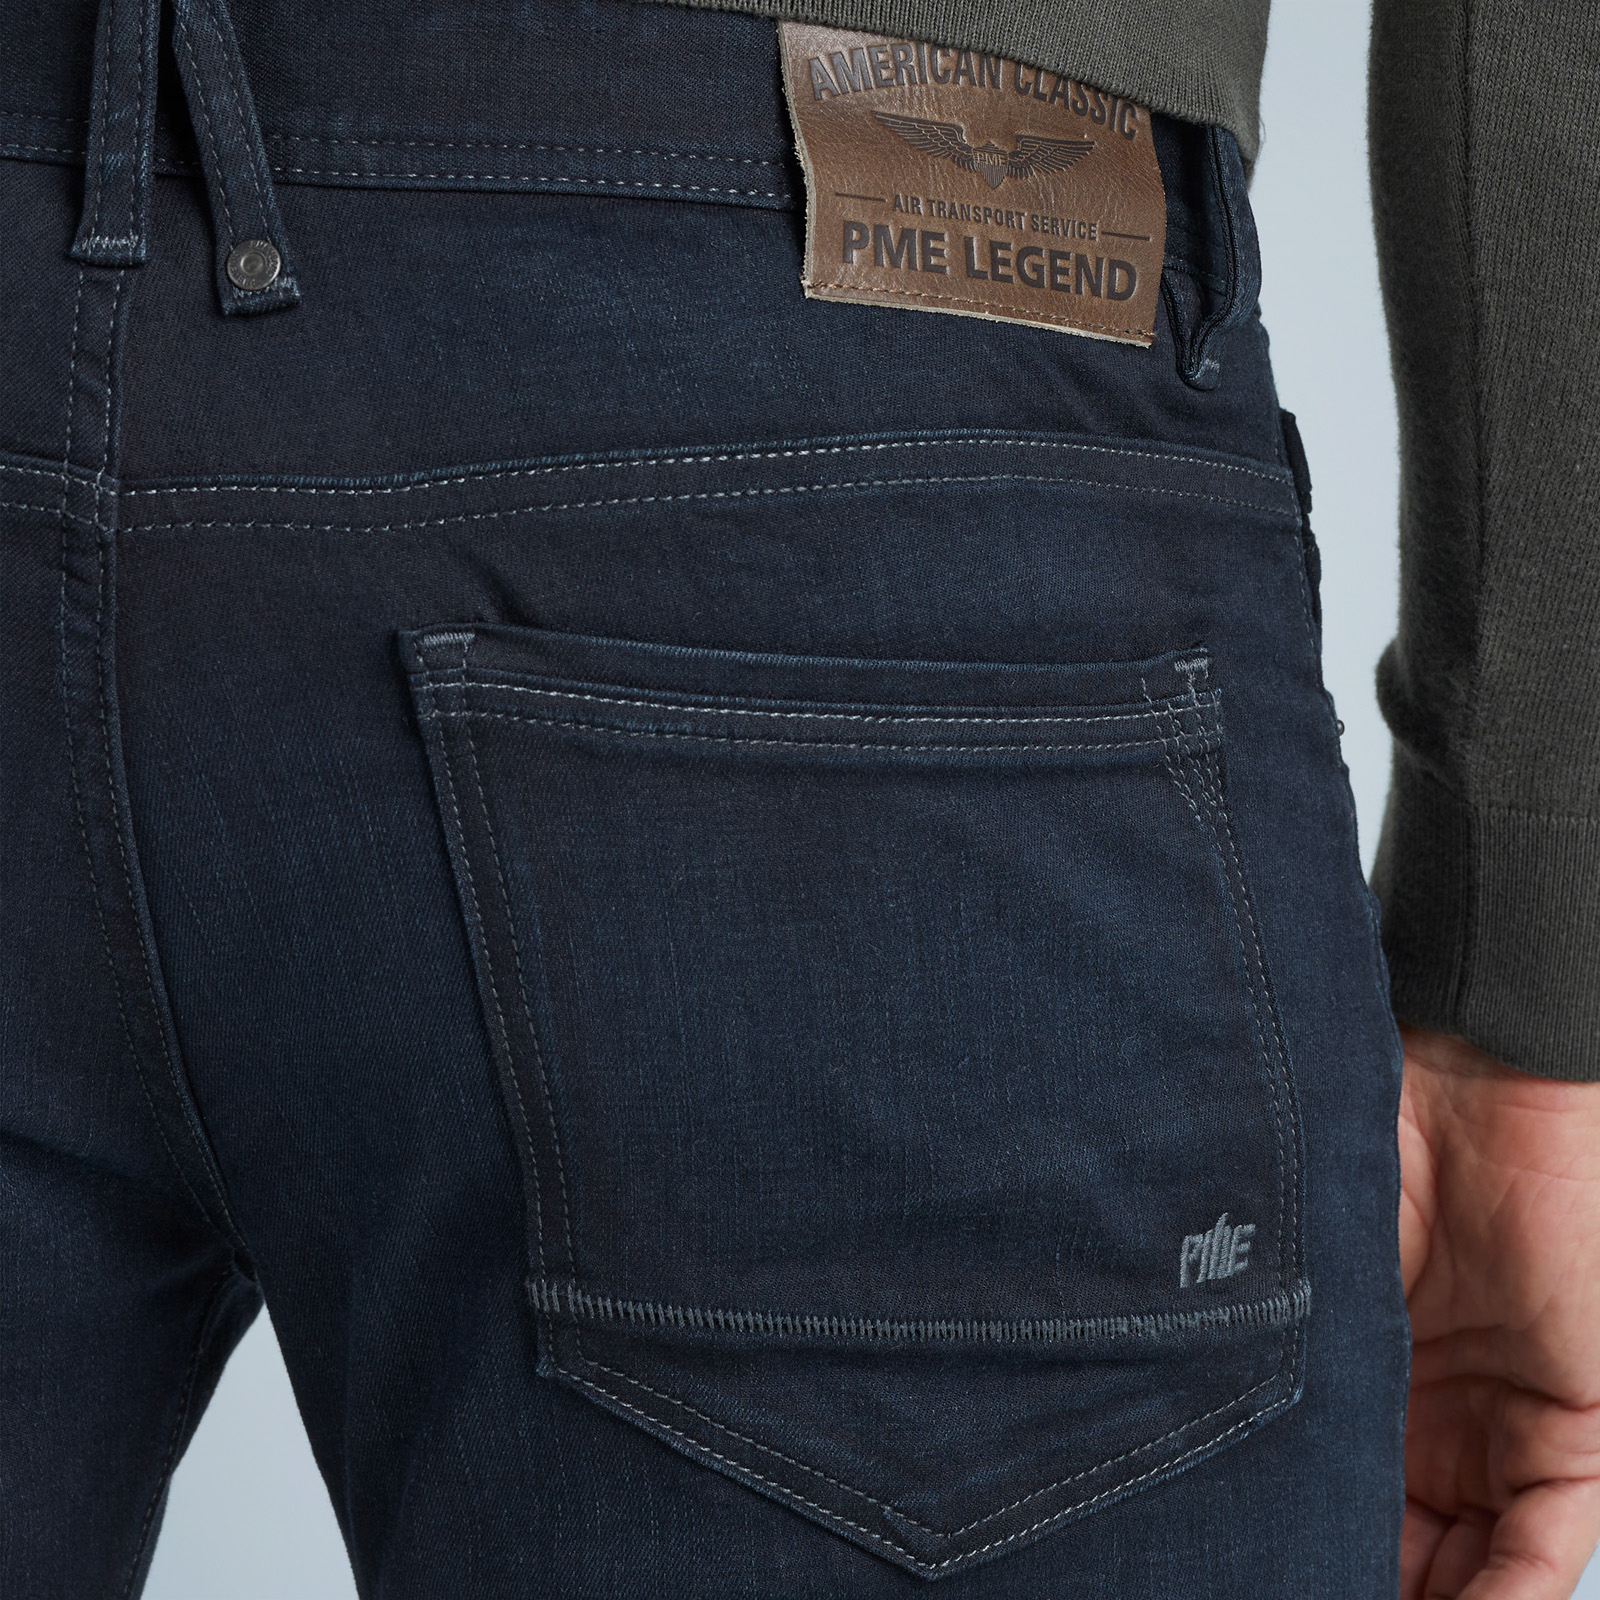 slim | LEGEND Free and shipping PME | fit returns Tailwheel jeans